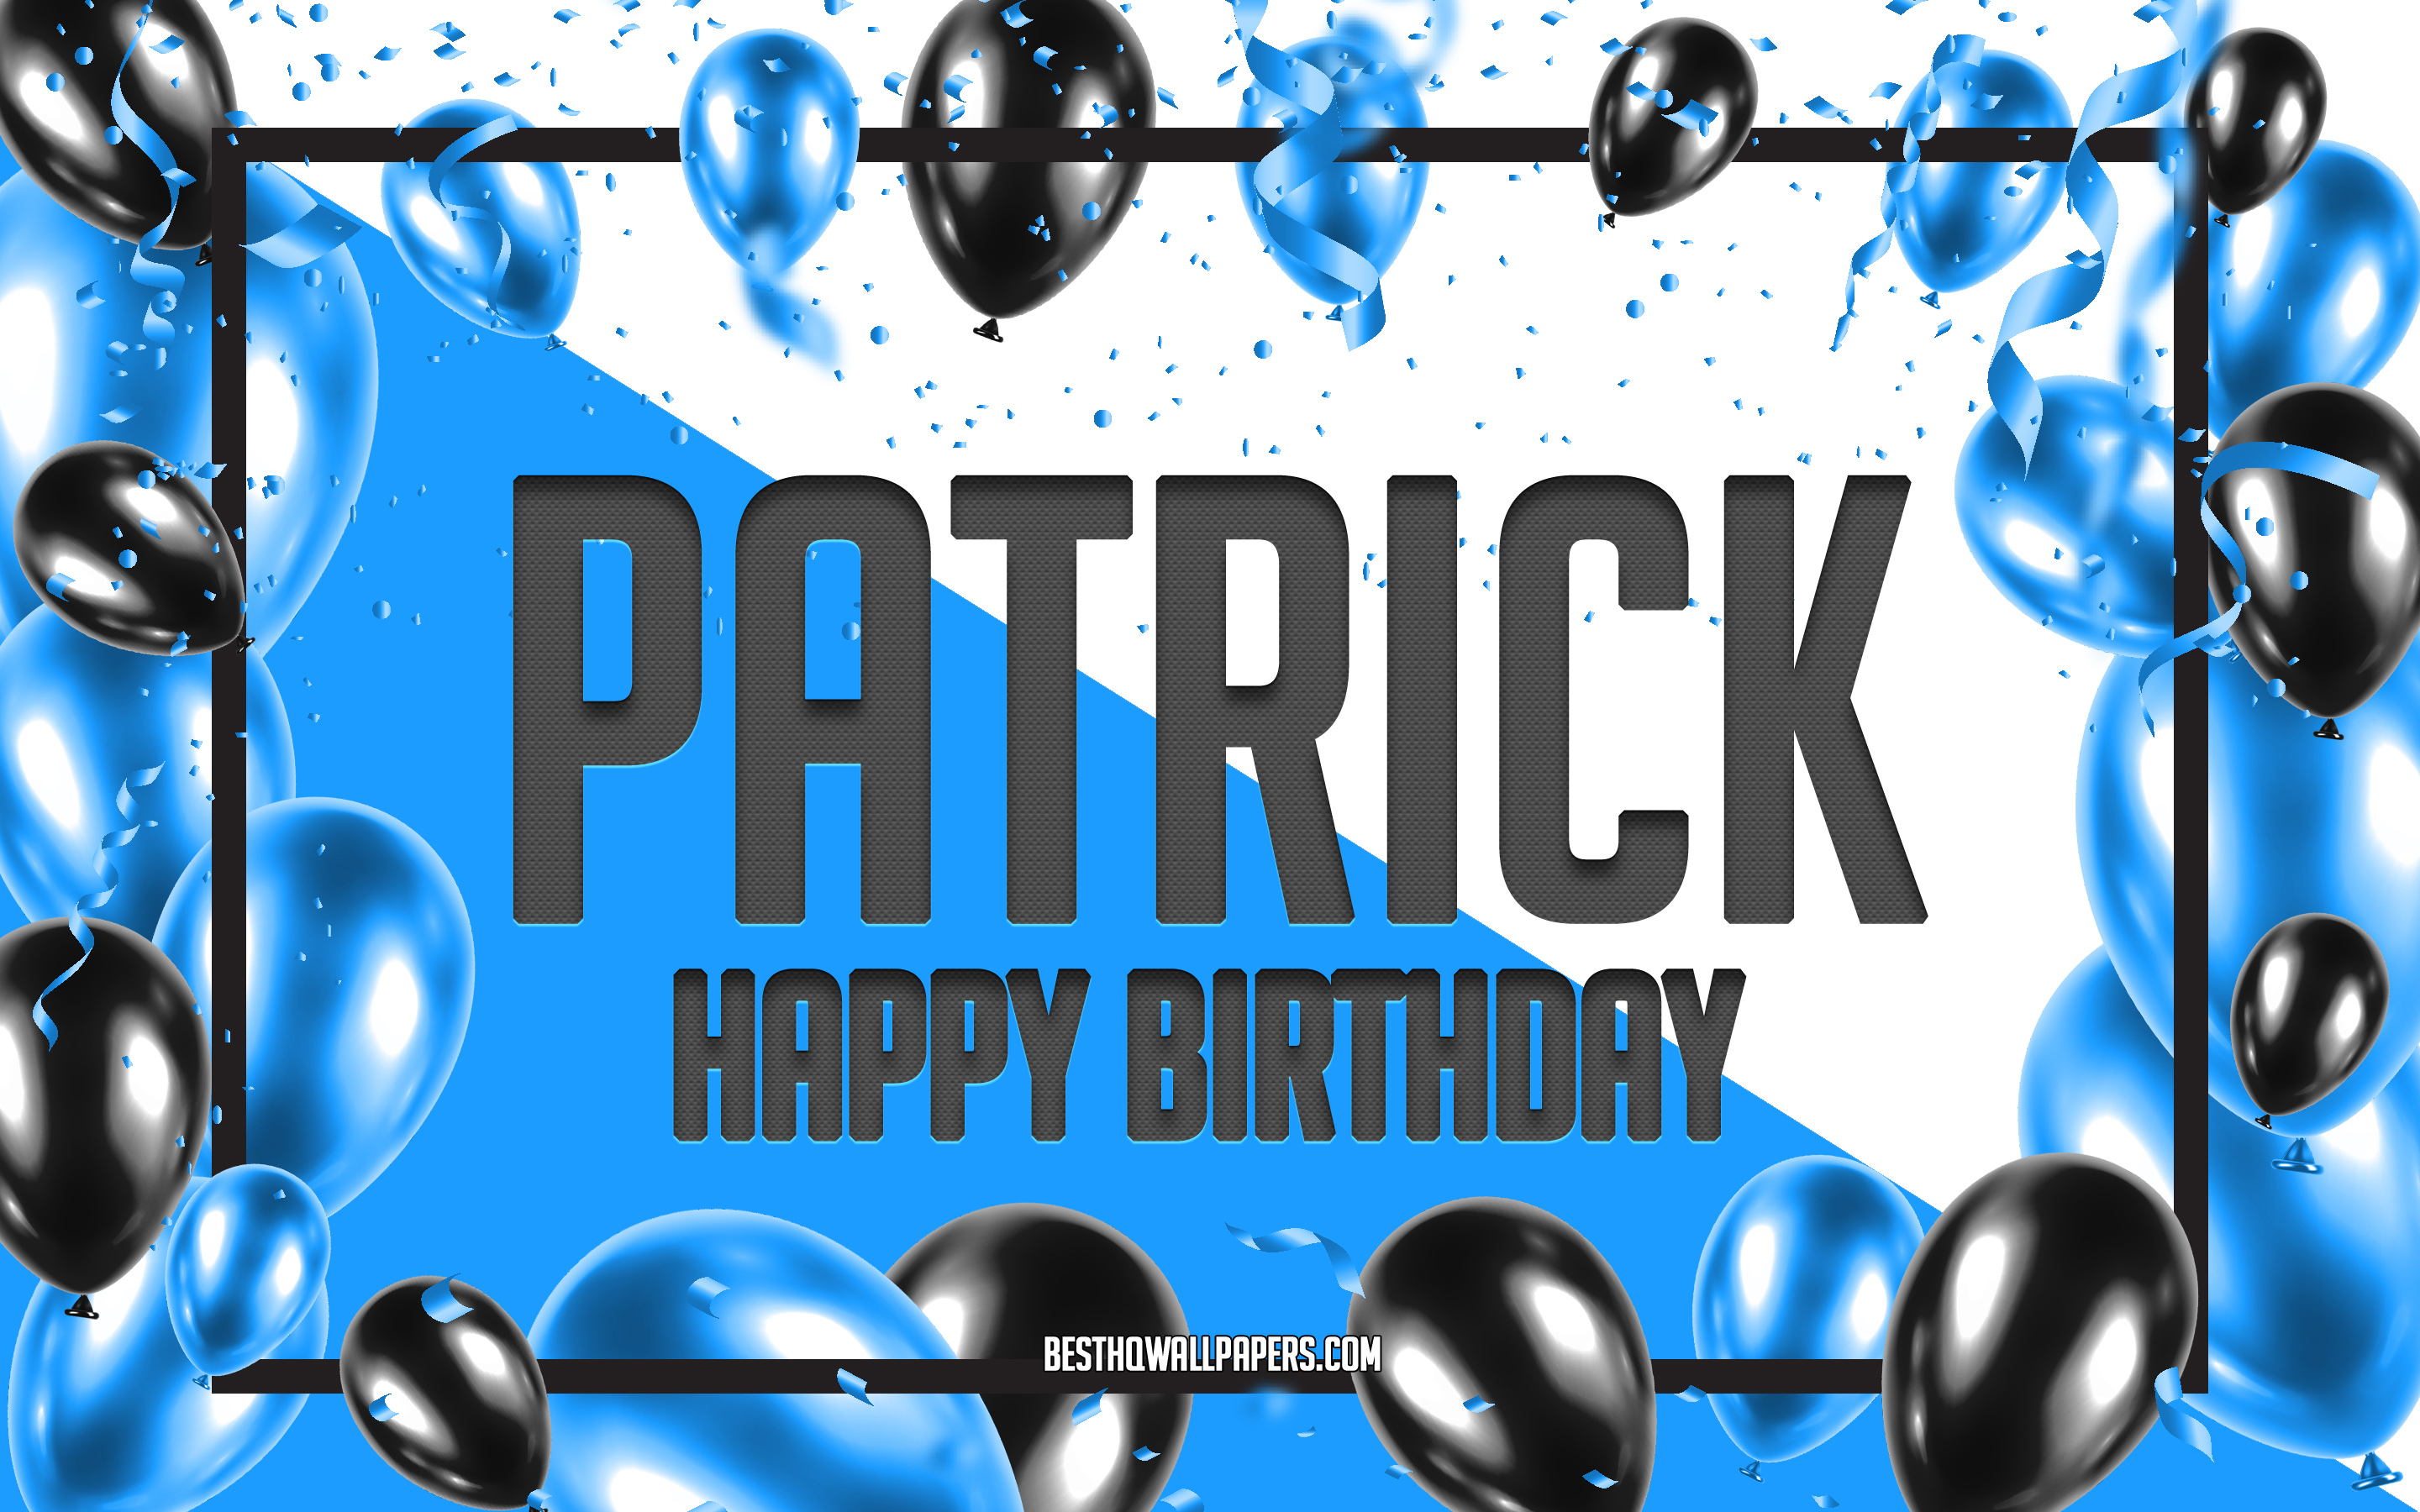 Download Wallpapers Happy Birthday Patrick Birthday Balloons Background Patrick Wallpapers With Names Patrick Happy Birthday Blue Balloons Birthday Background Greeting Card Patrick Birthday For Desktop With Resolution x1800 High Quality Hd